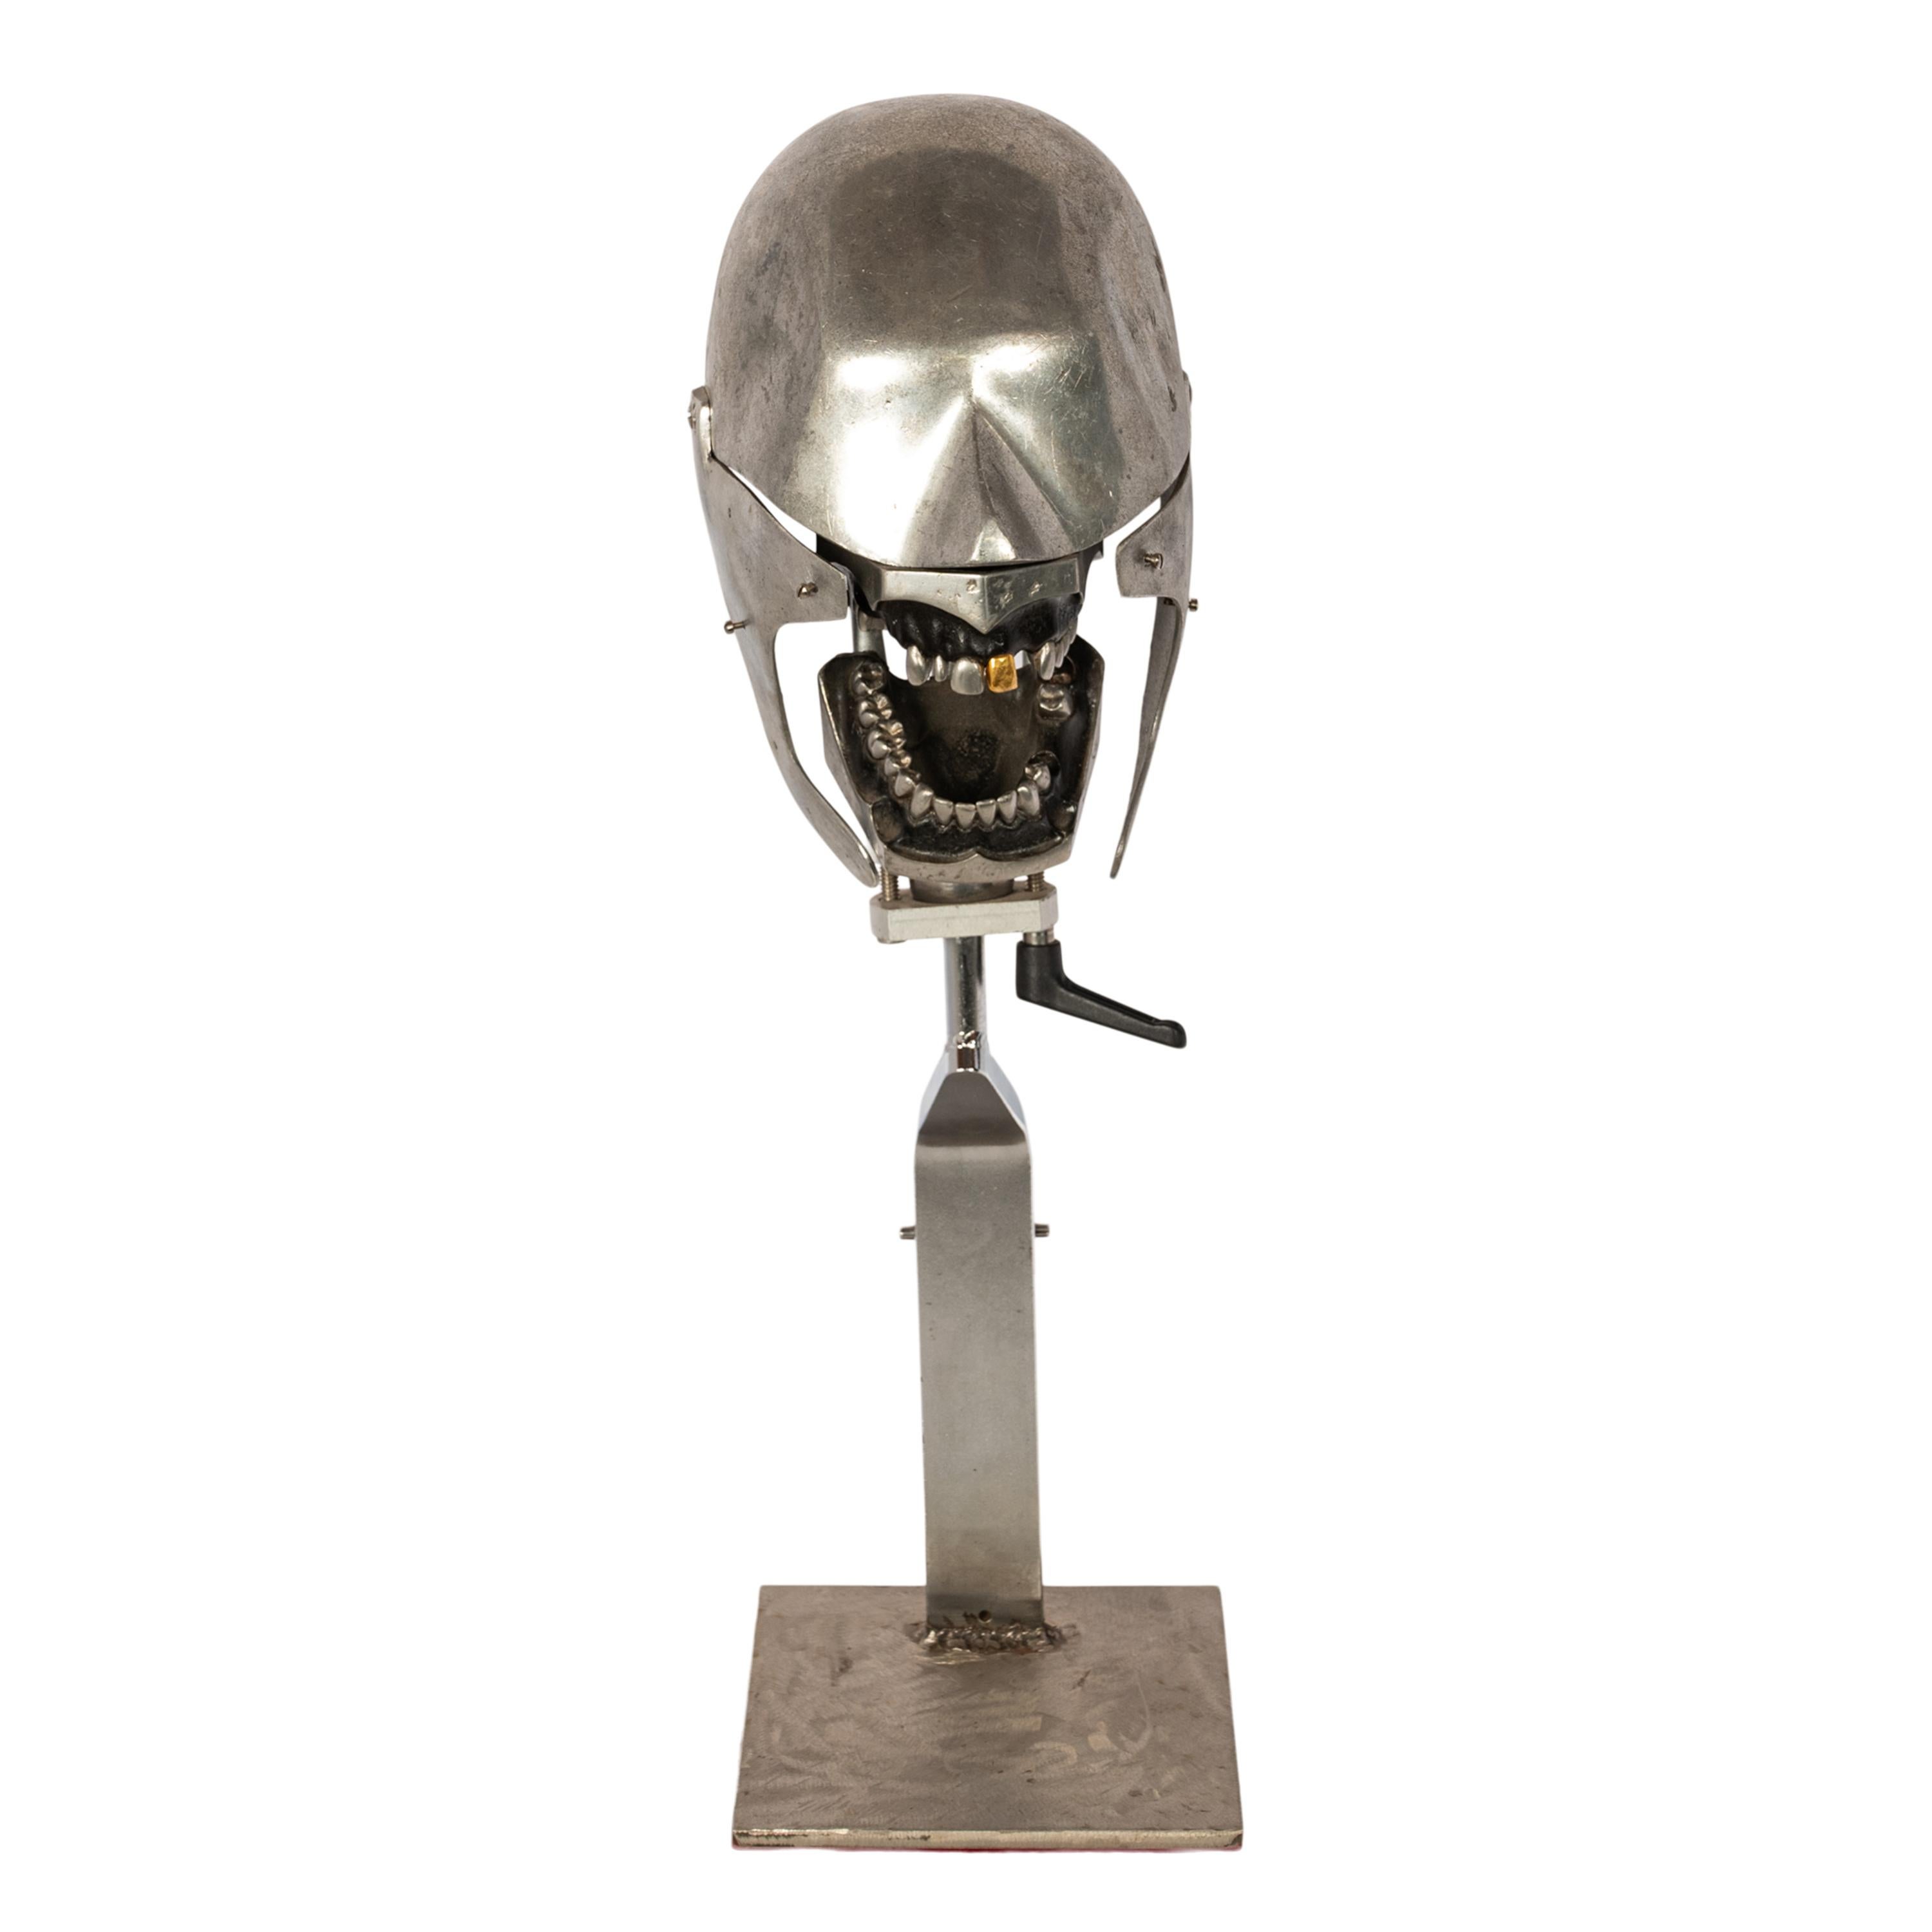 Antique aluminum dental phantom teaching head model with a gold tooth, 1920's.
A wonderful fun sculptural dental phantom, the aluminum head with lower and upper jaw one of the upper incisors is gold. The head can be posed with an adjustable lever